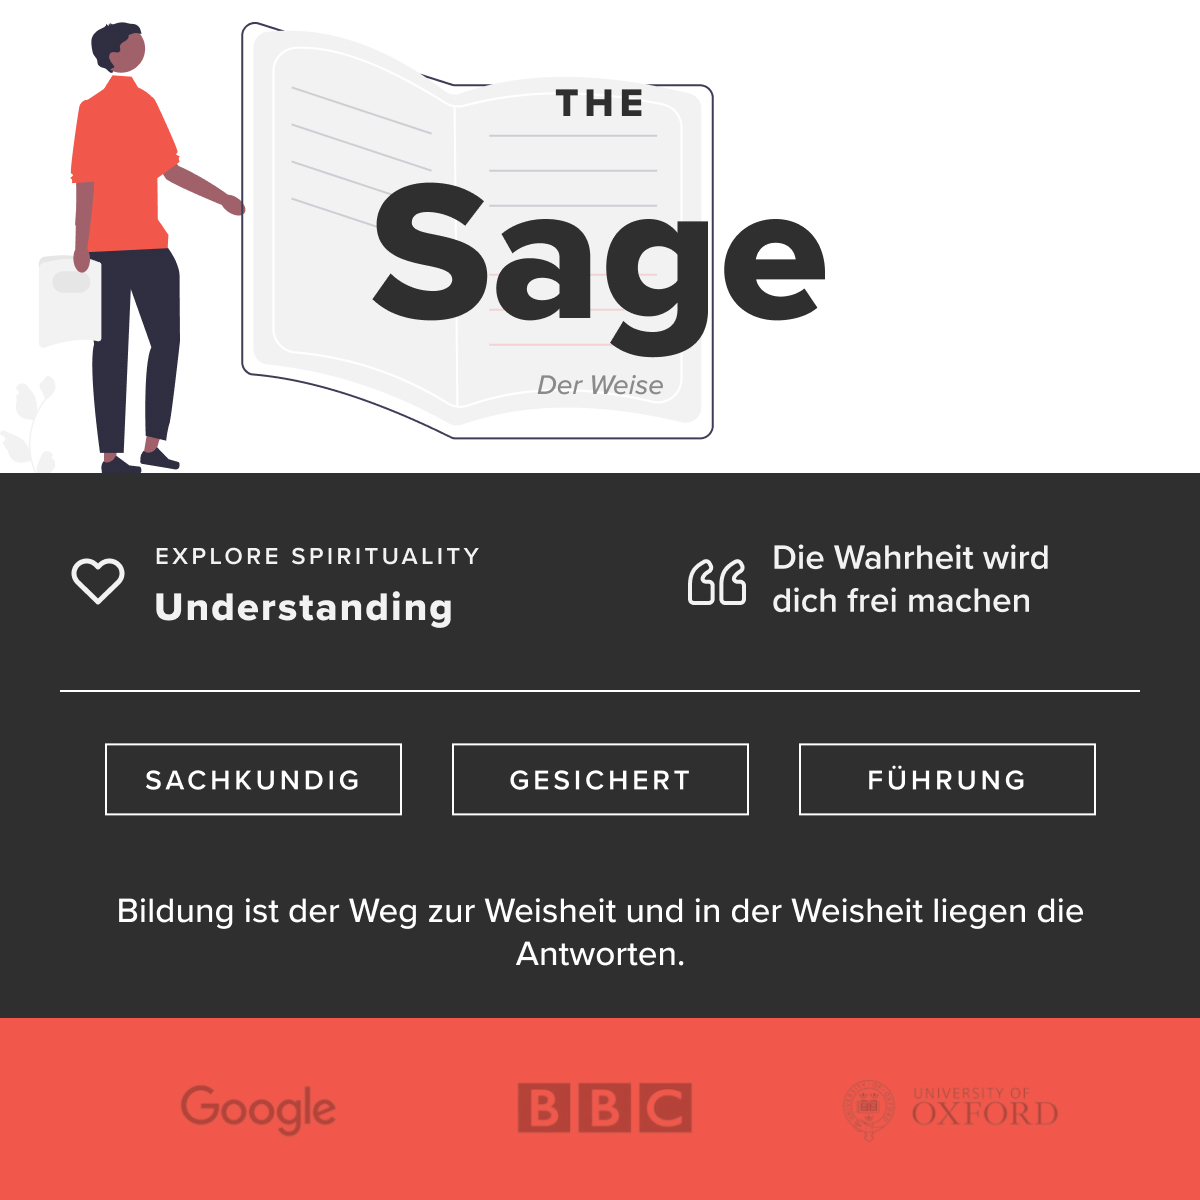 The sage is a website with an image of a man and a woman.